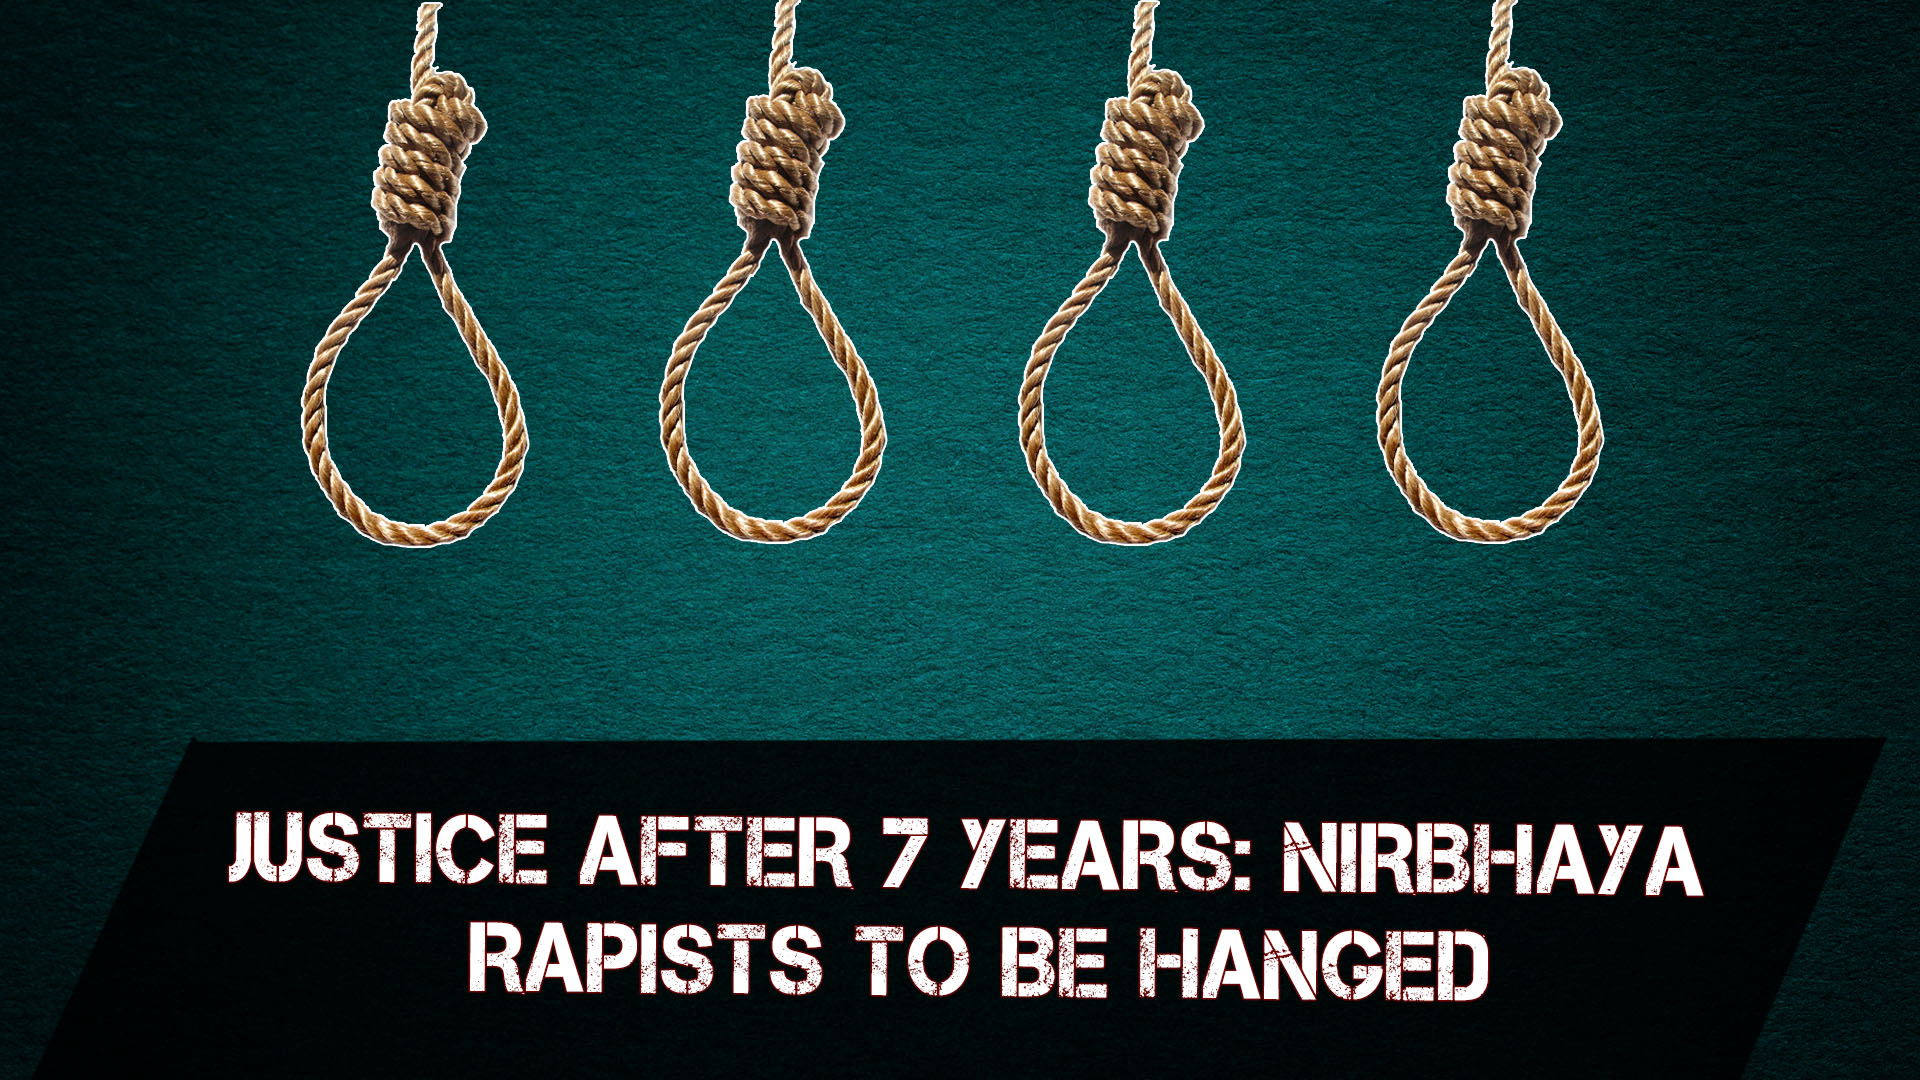 Justice after 7 years: Nirbhaya rapists to be hanged